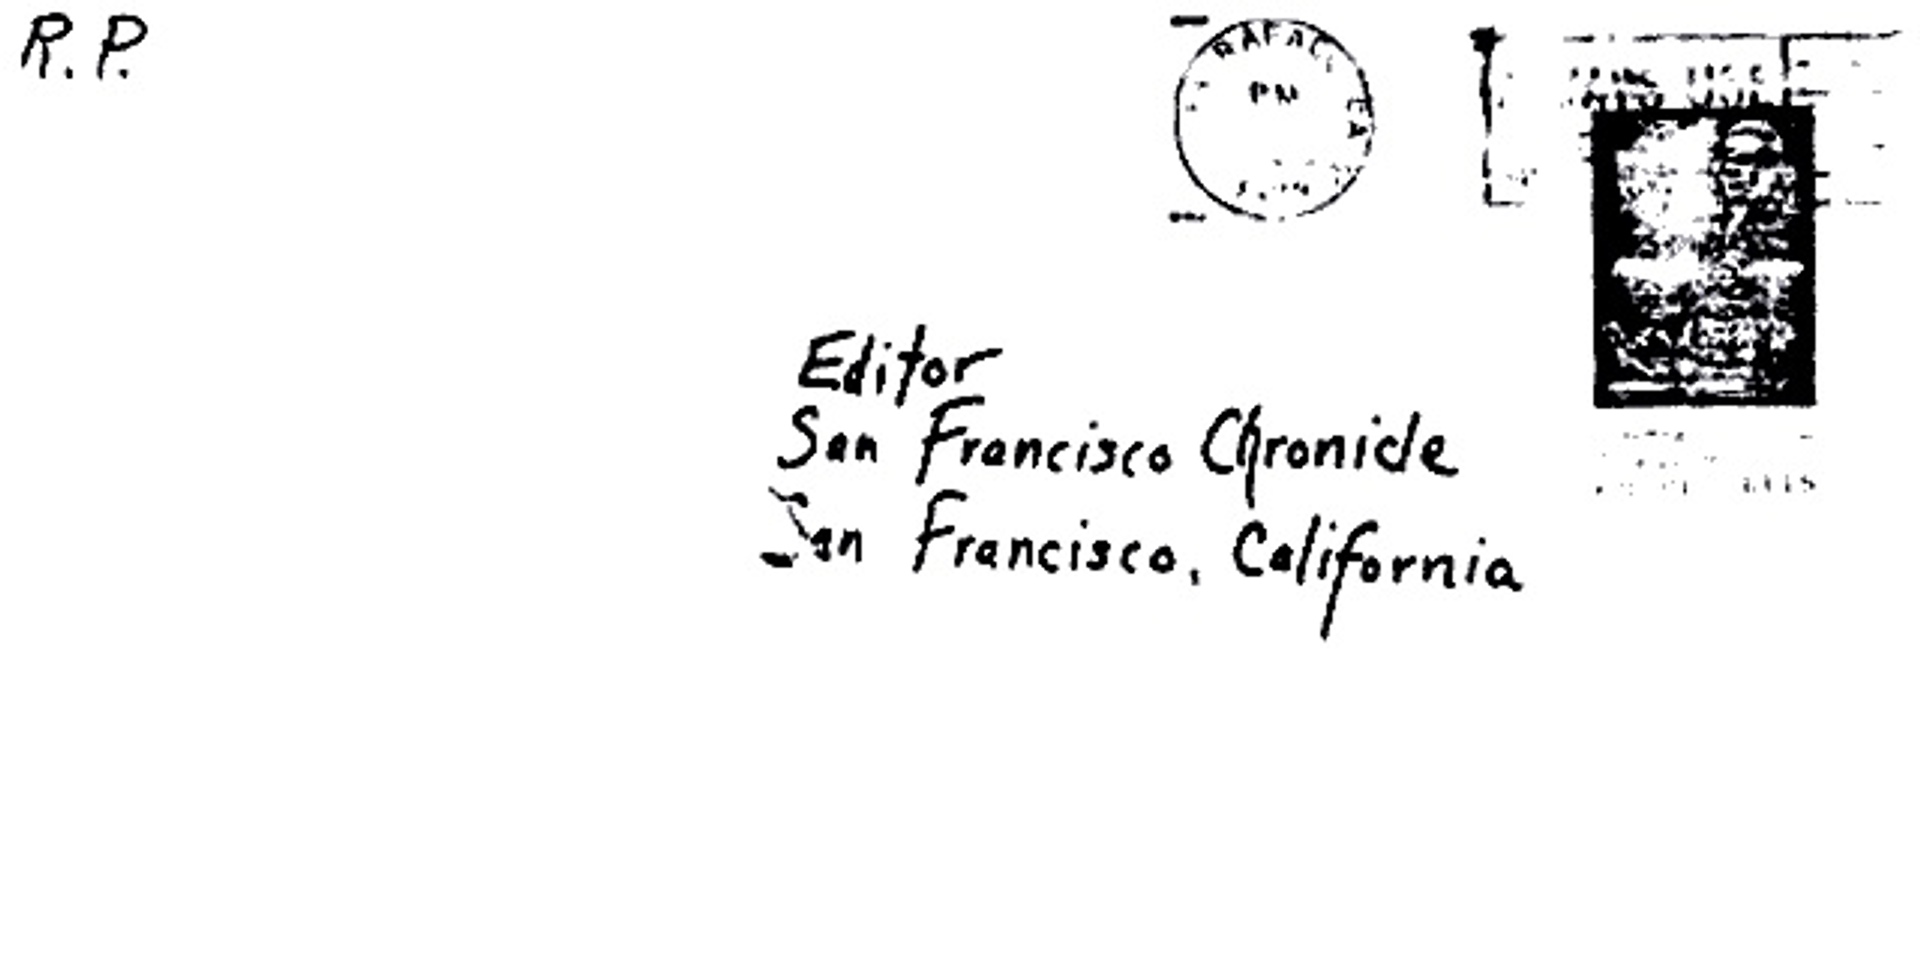 front of envelope 07-08-74